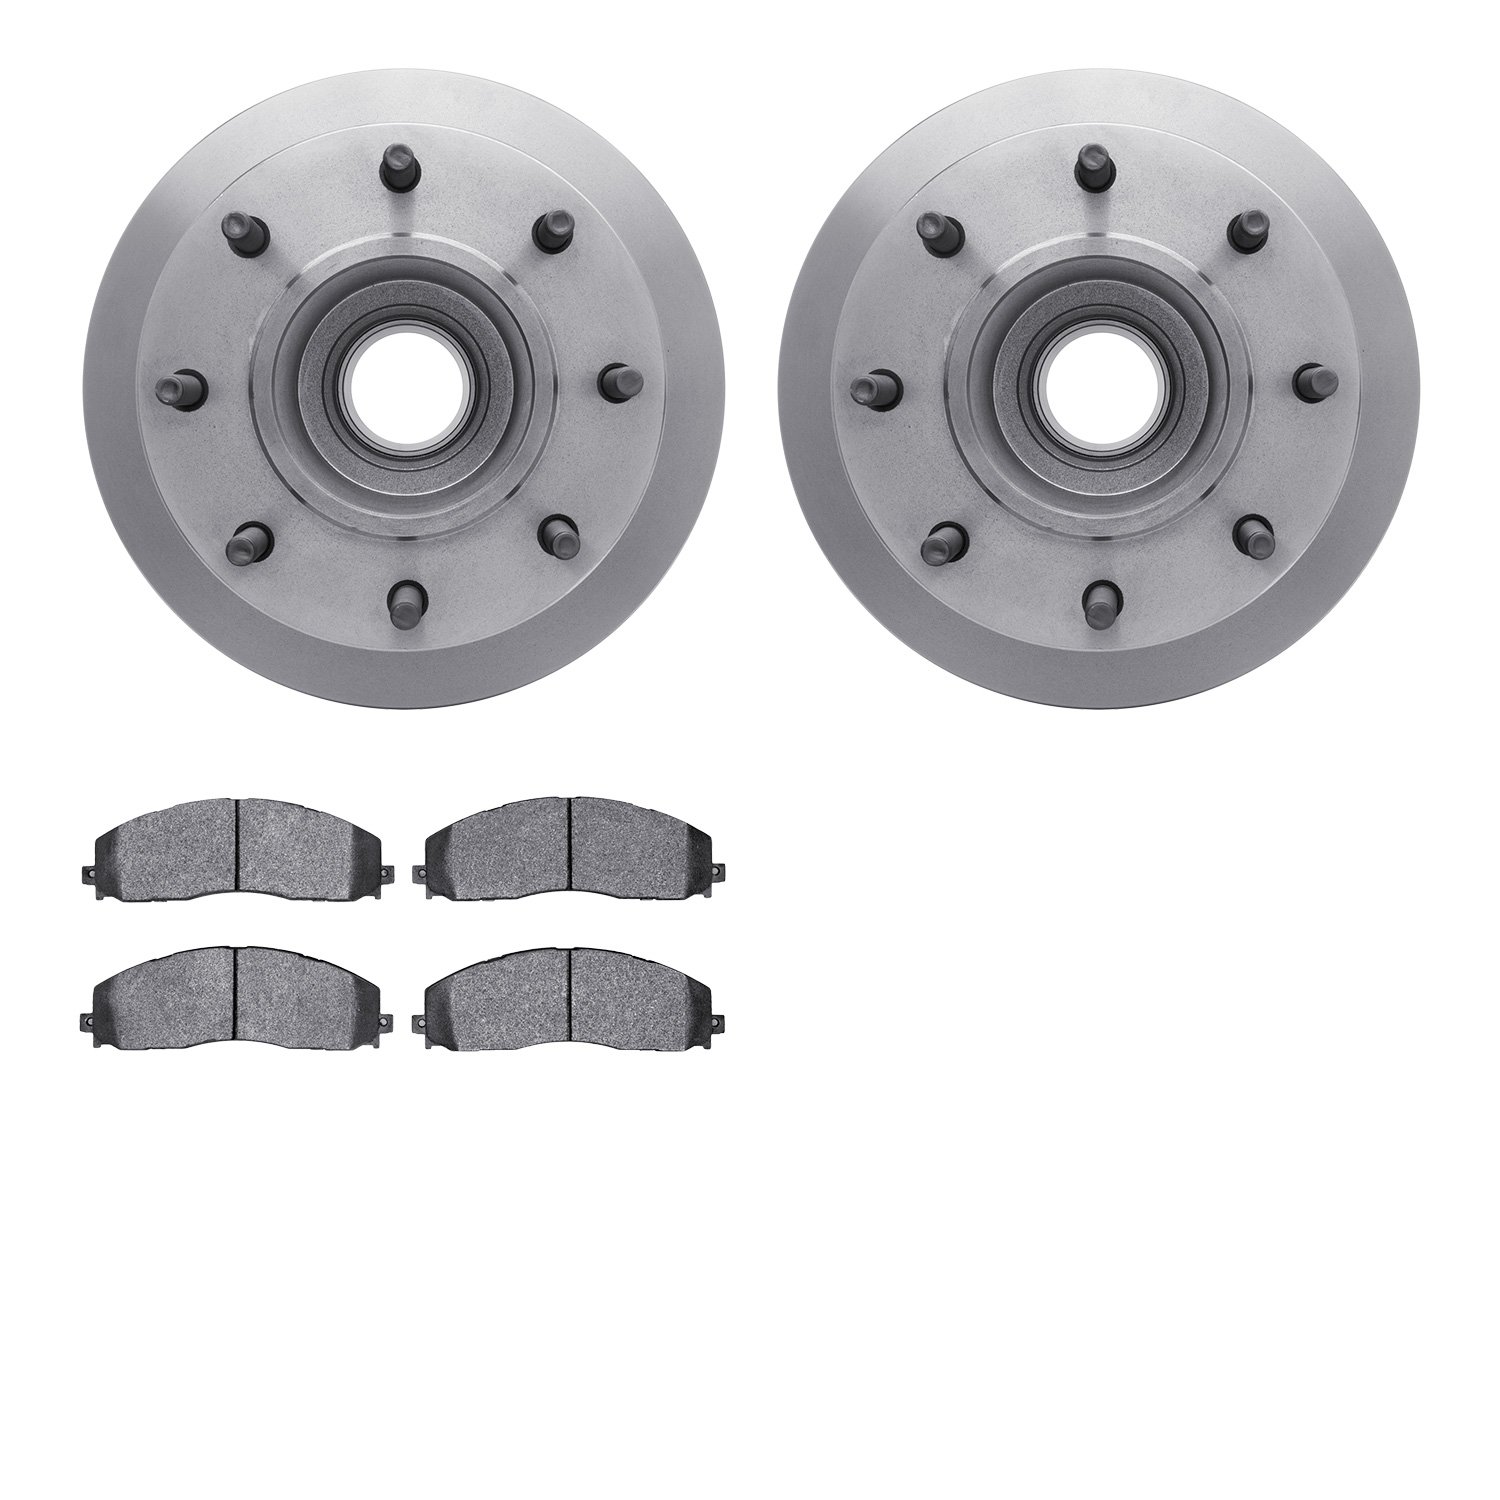 6502-99684 Brake Rotors w/5000 Advanced Brake Pads Kit, Fits Select Ford/Lincoln/Mercury/Mazda, Position: Front